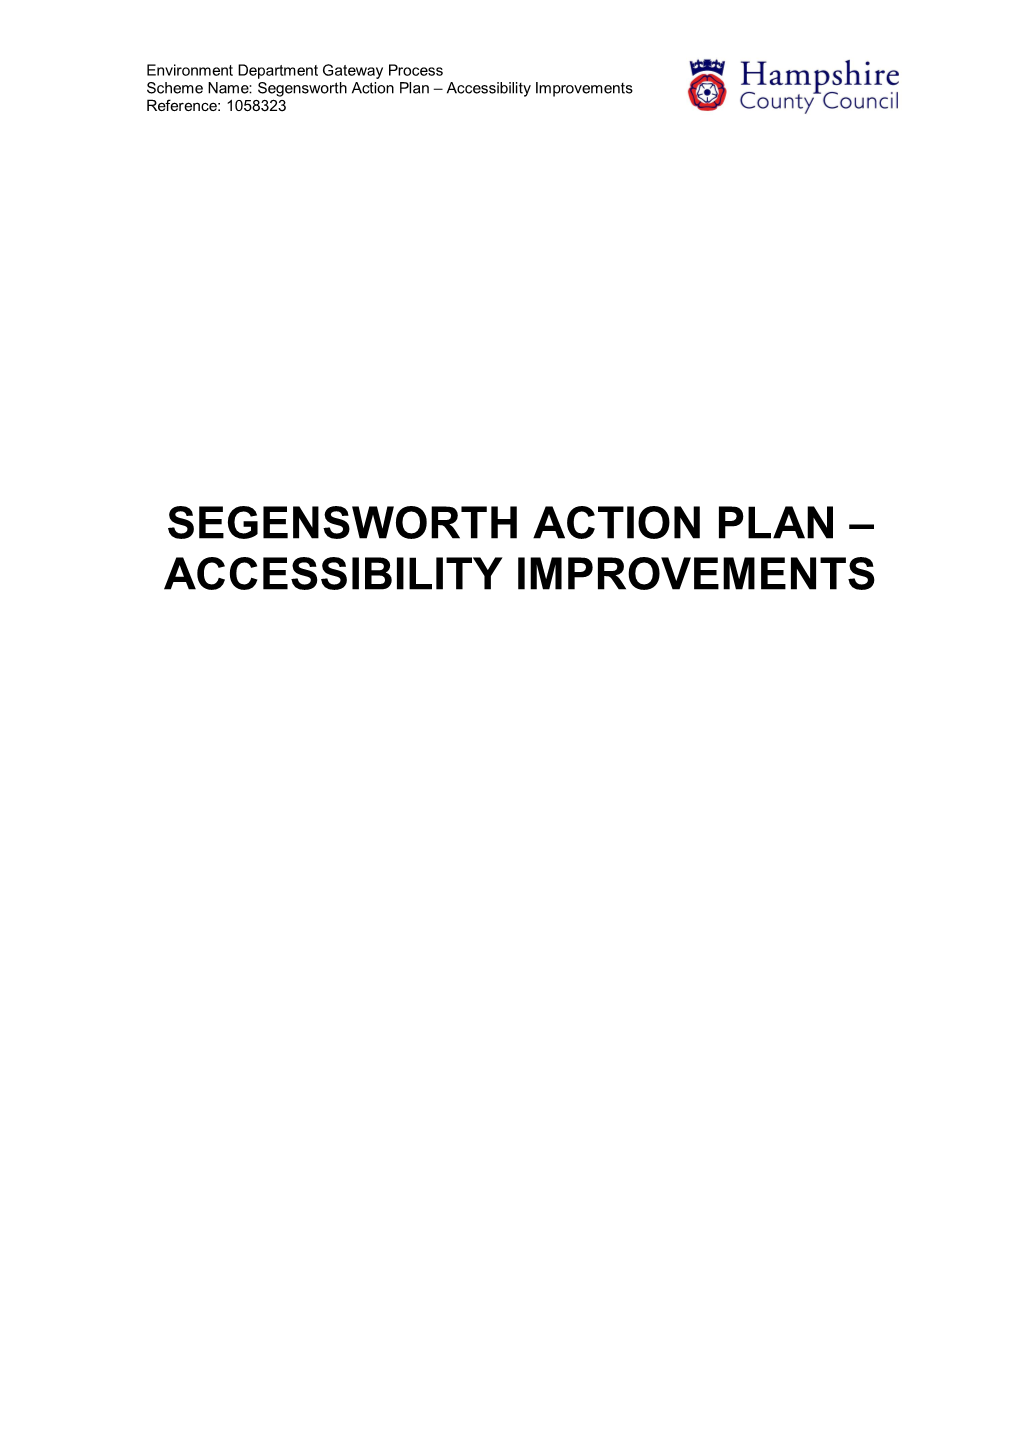 Segensworth Action Plan – Accessibility Improvements Reference: 1058323